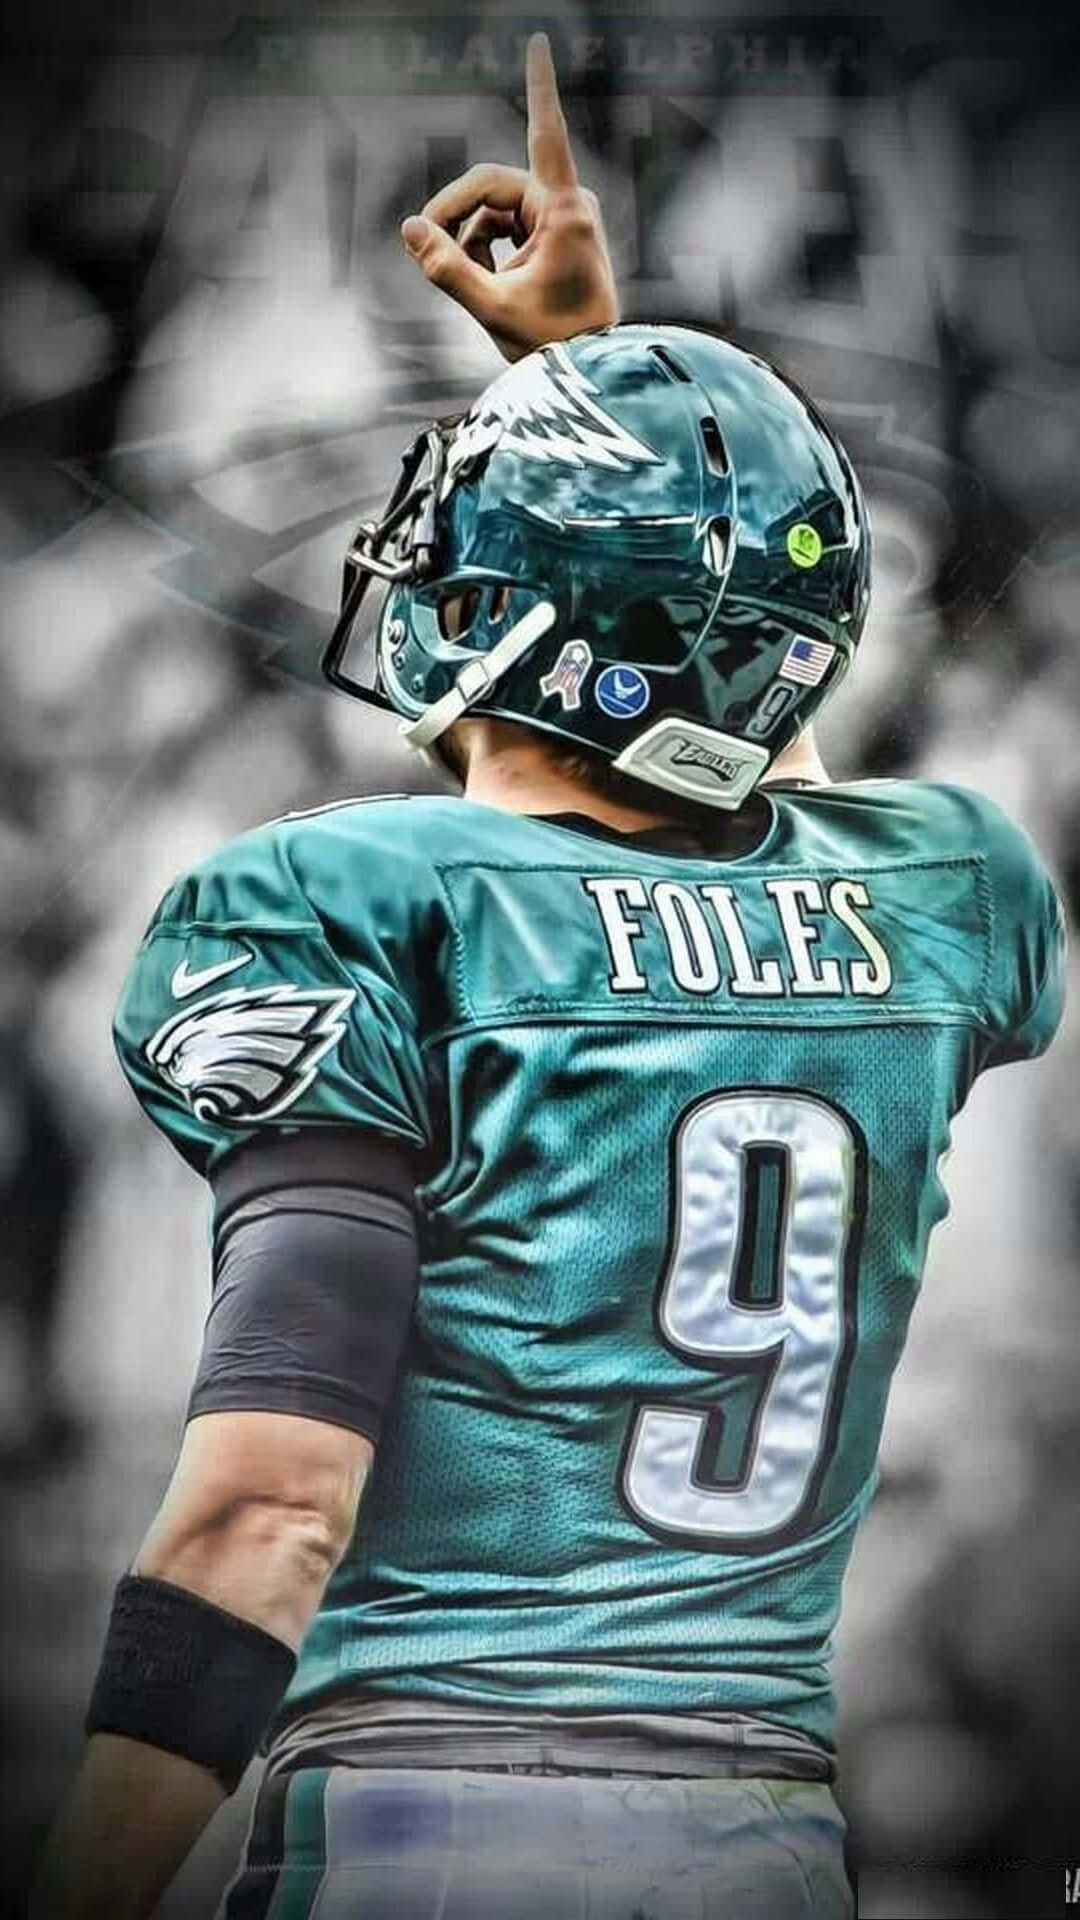 Eaglesfootball Nick Foles Would Be: 